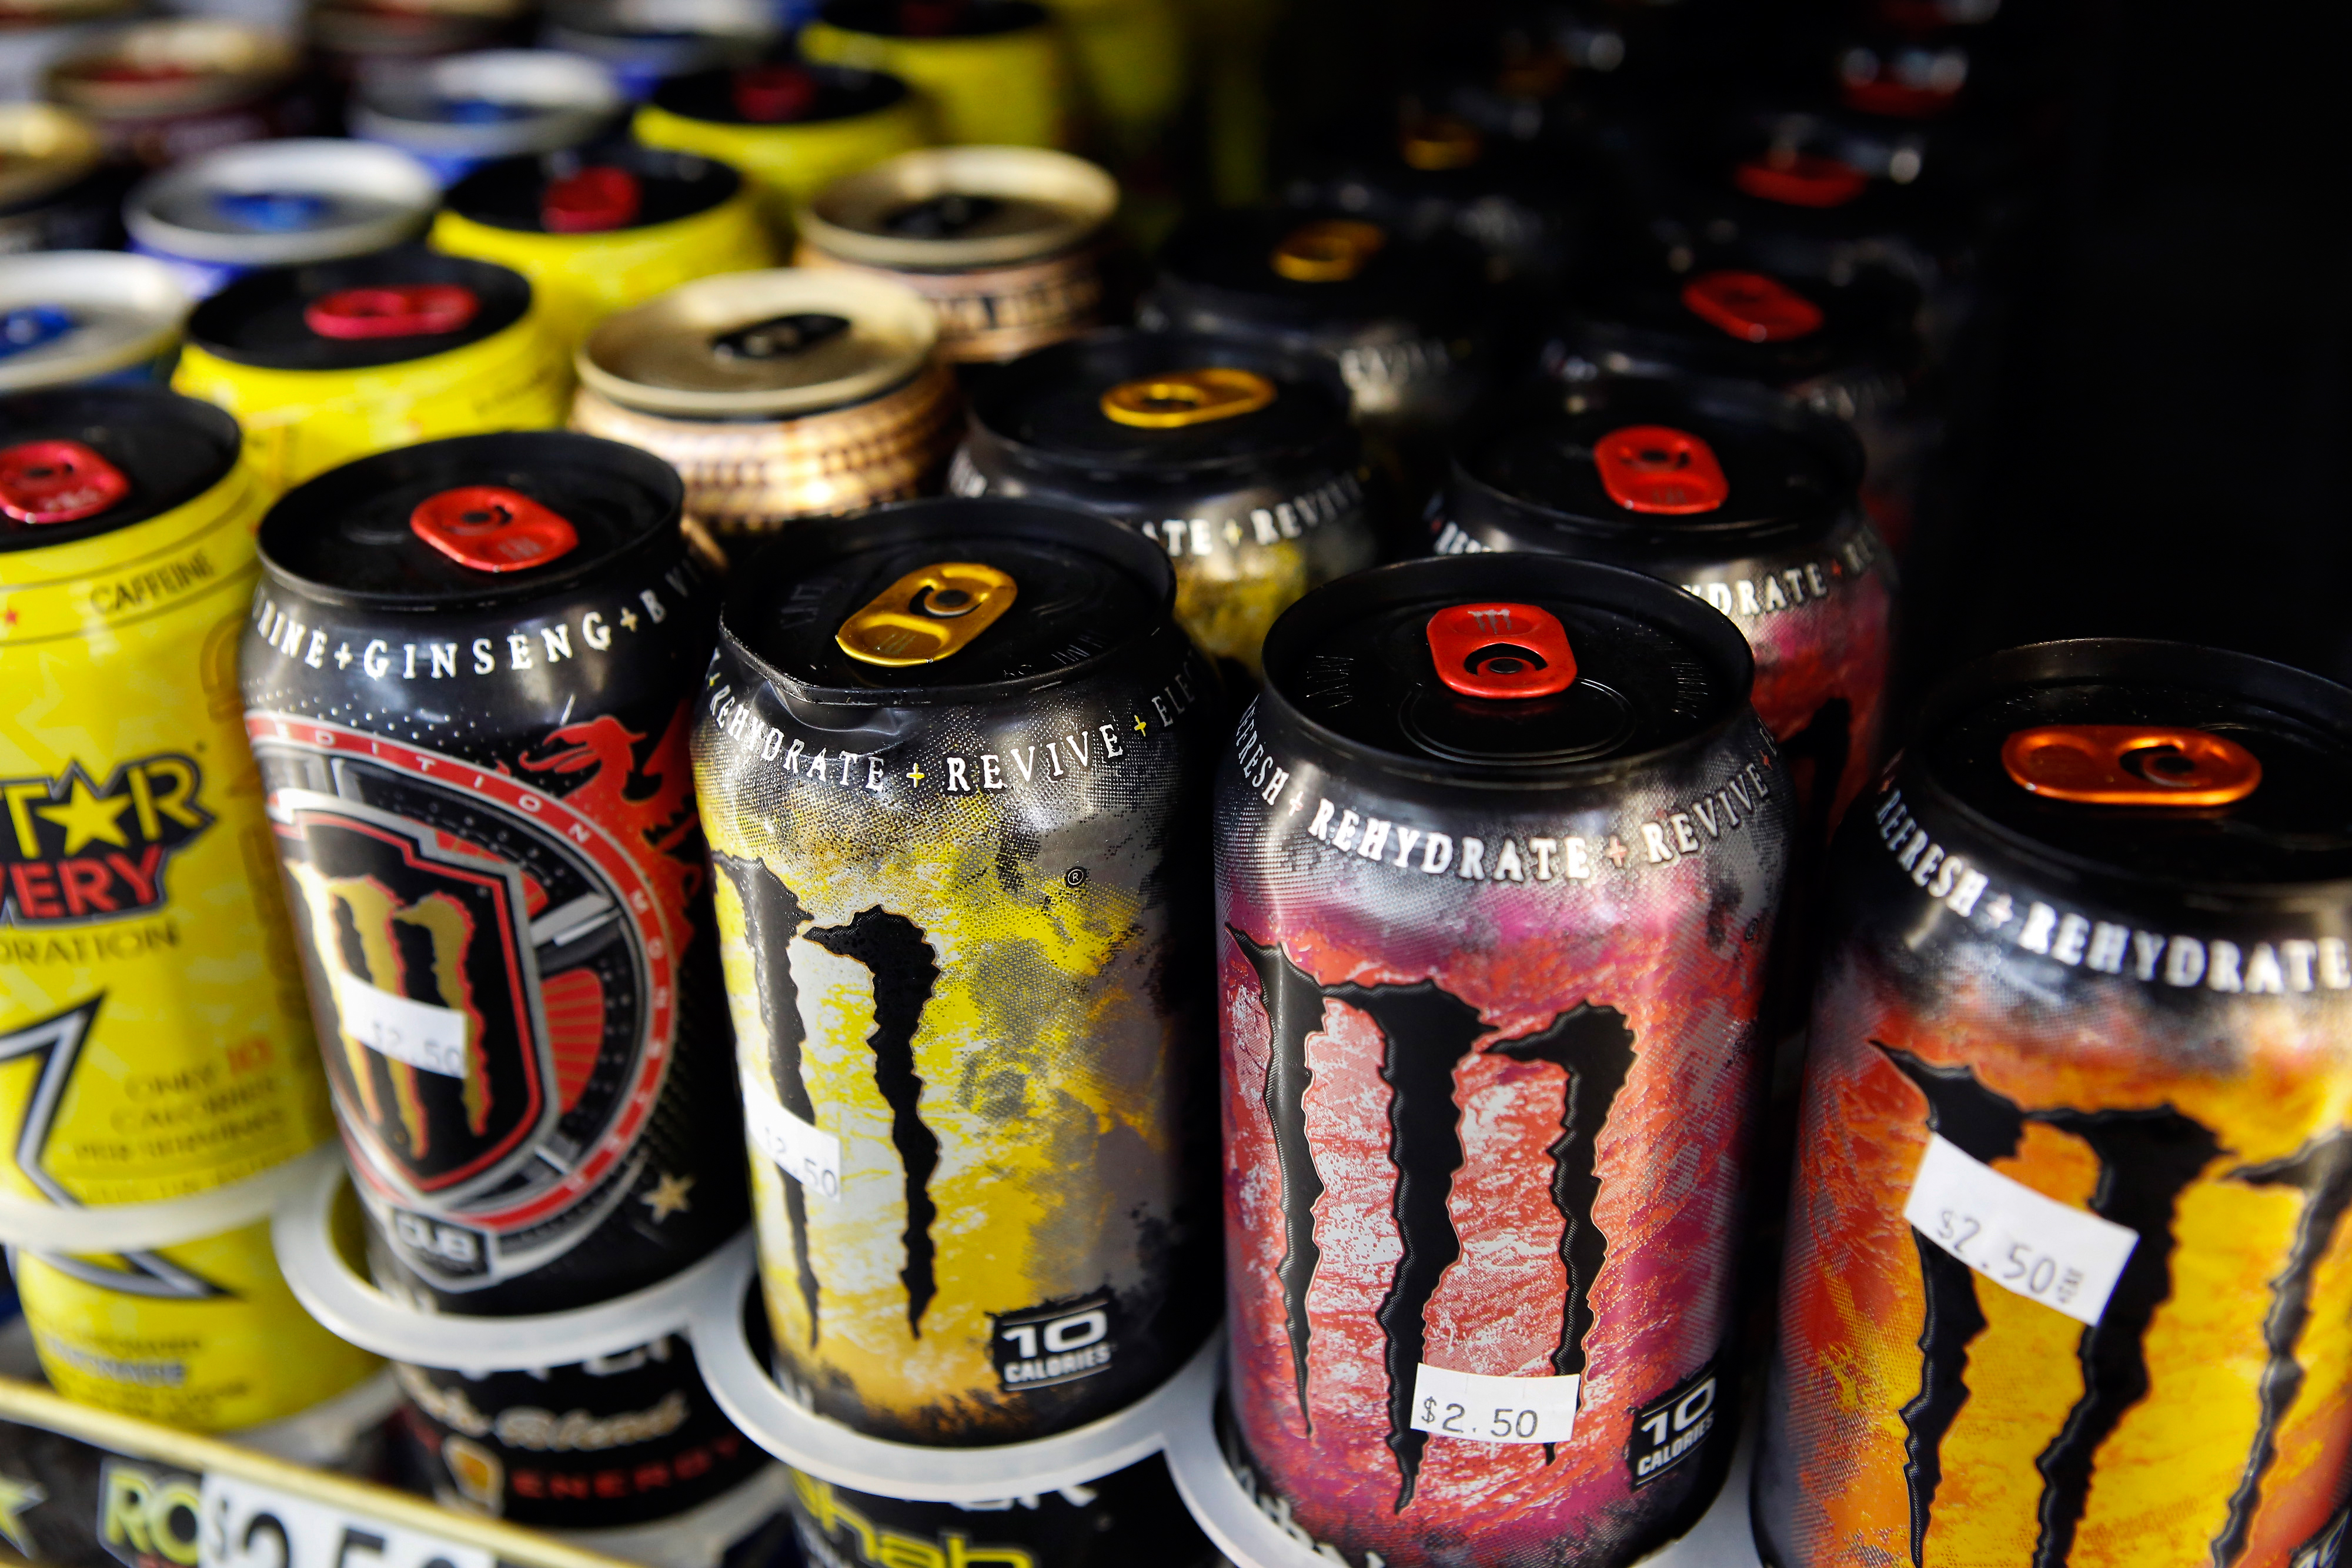 Cans of Monster Beverage Corp. energy drink are displayed for sale at a convenience store in Redondo Beach, California, U.S.